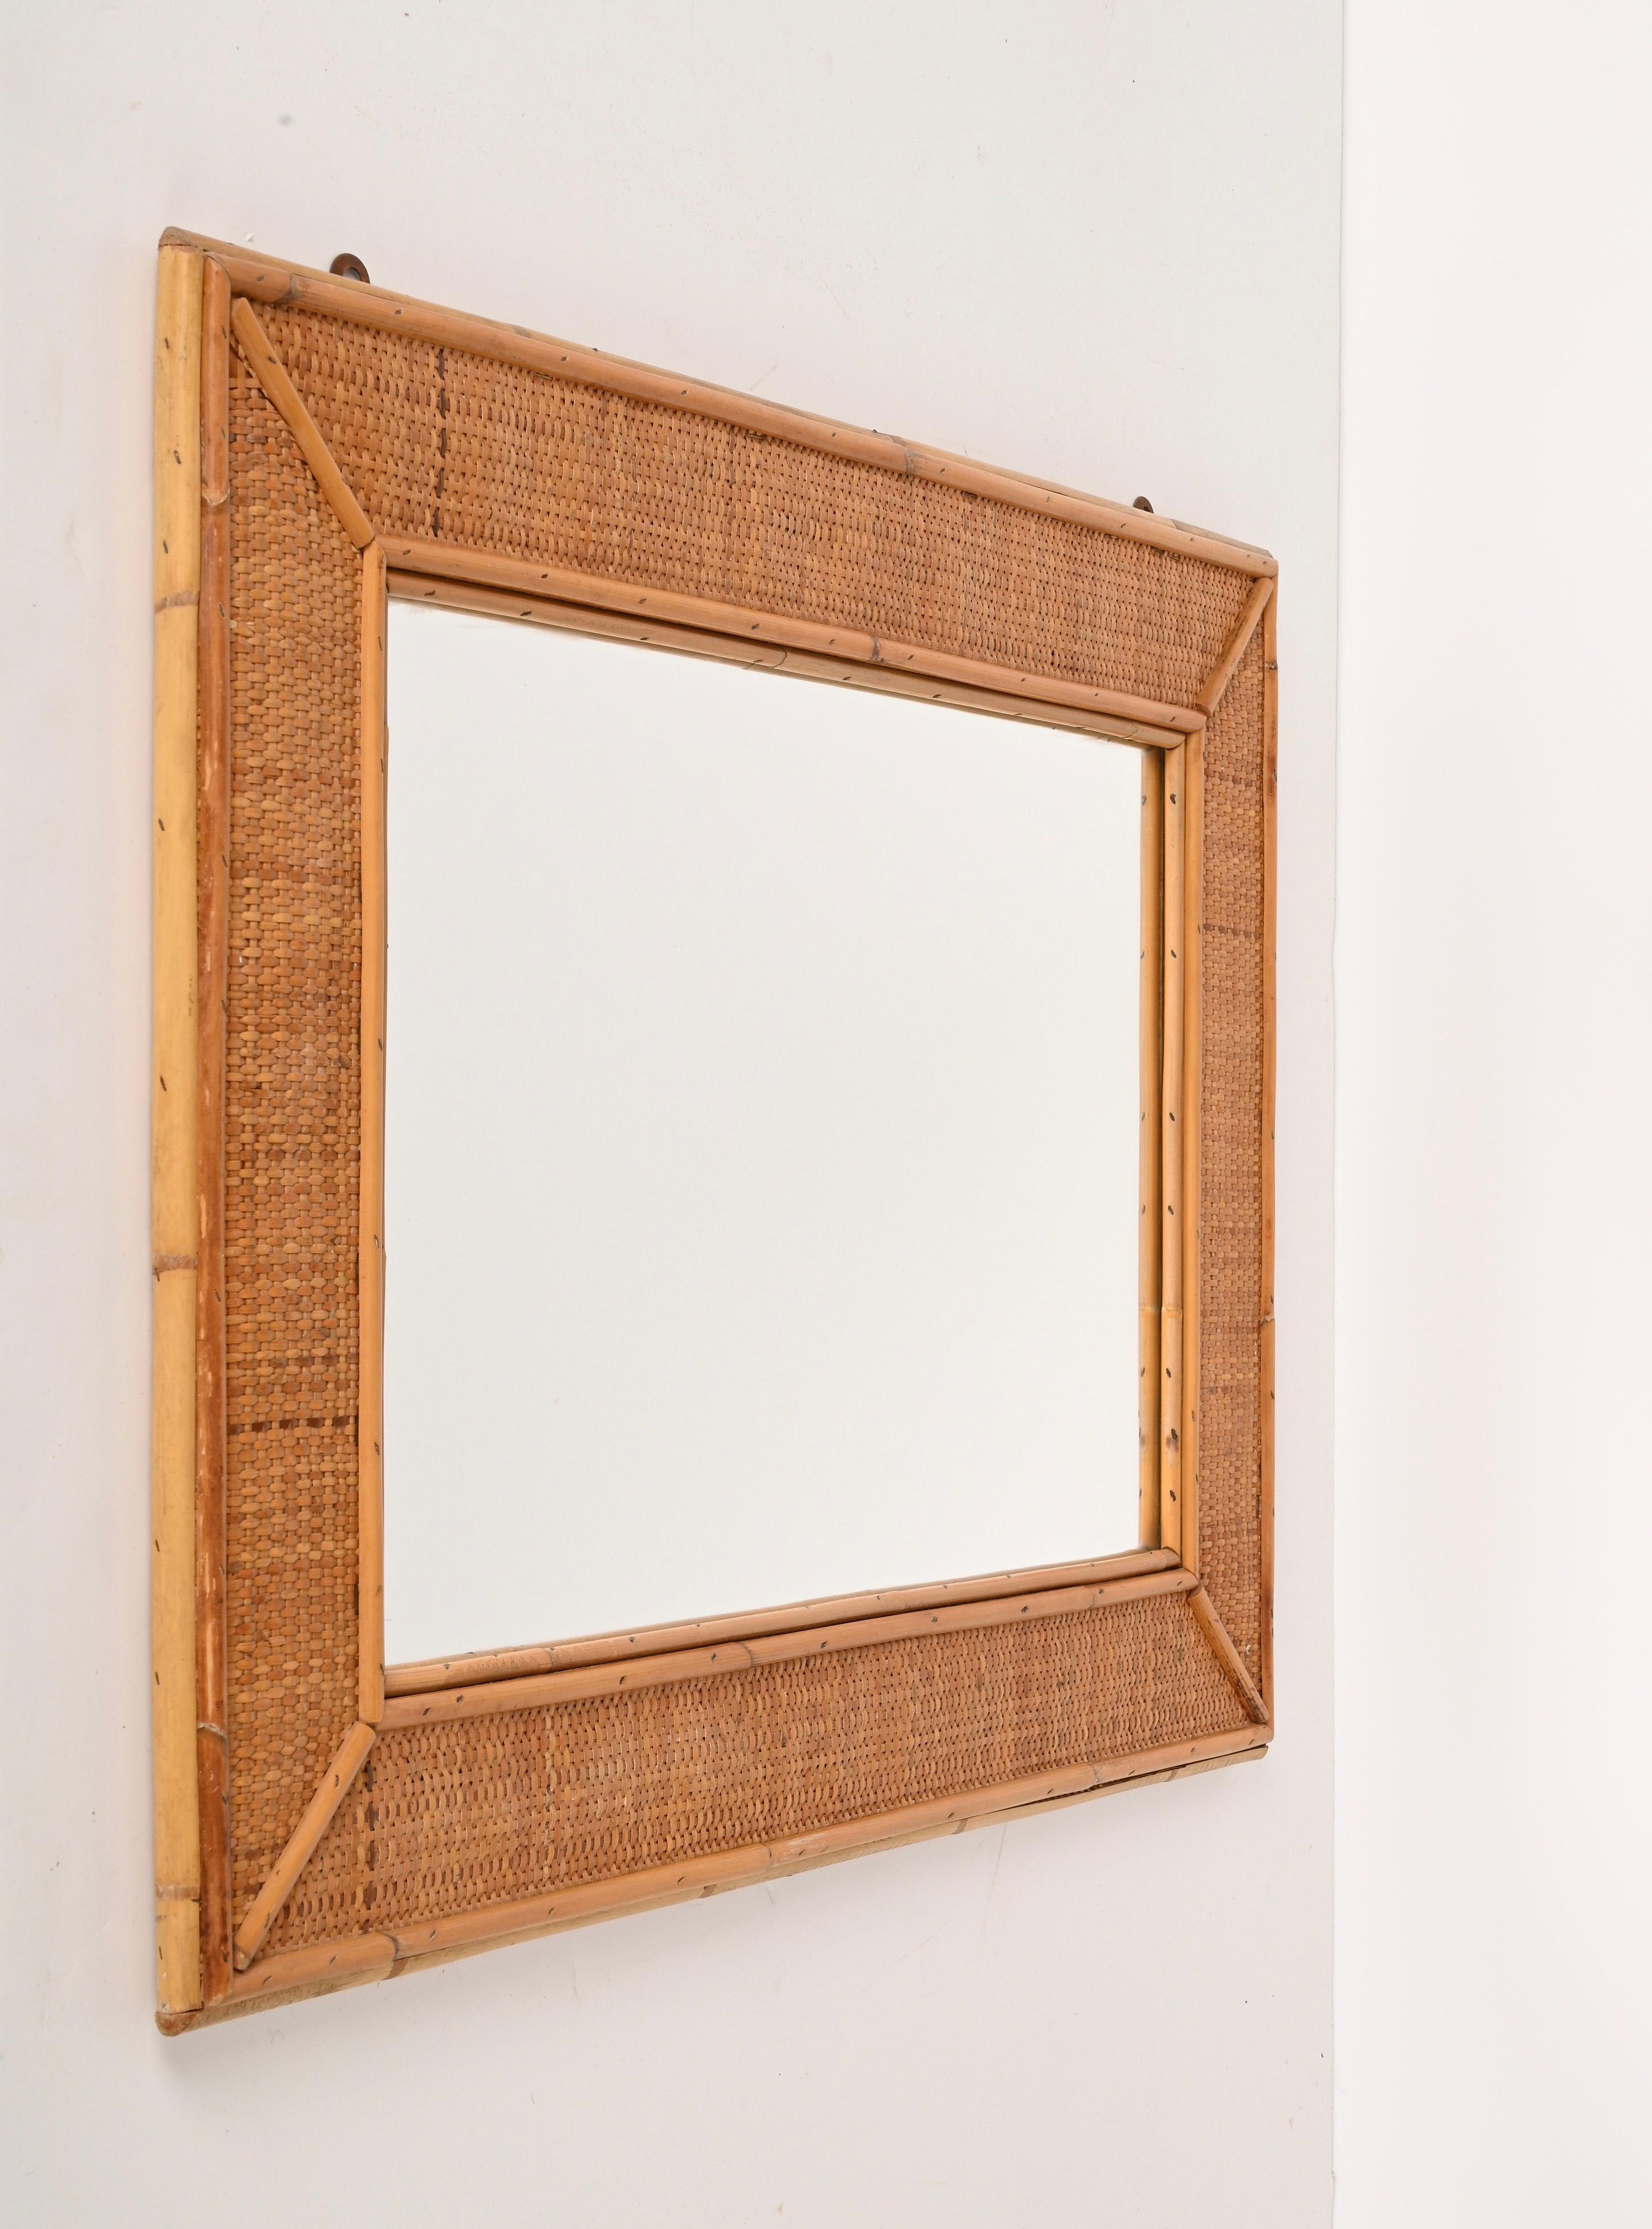 Midcentury Rectangular Italian Mirror with Bamboo and Woven Wicker Frame, 1970s For Sale 3